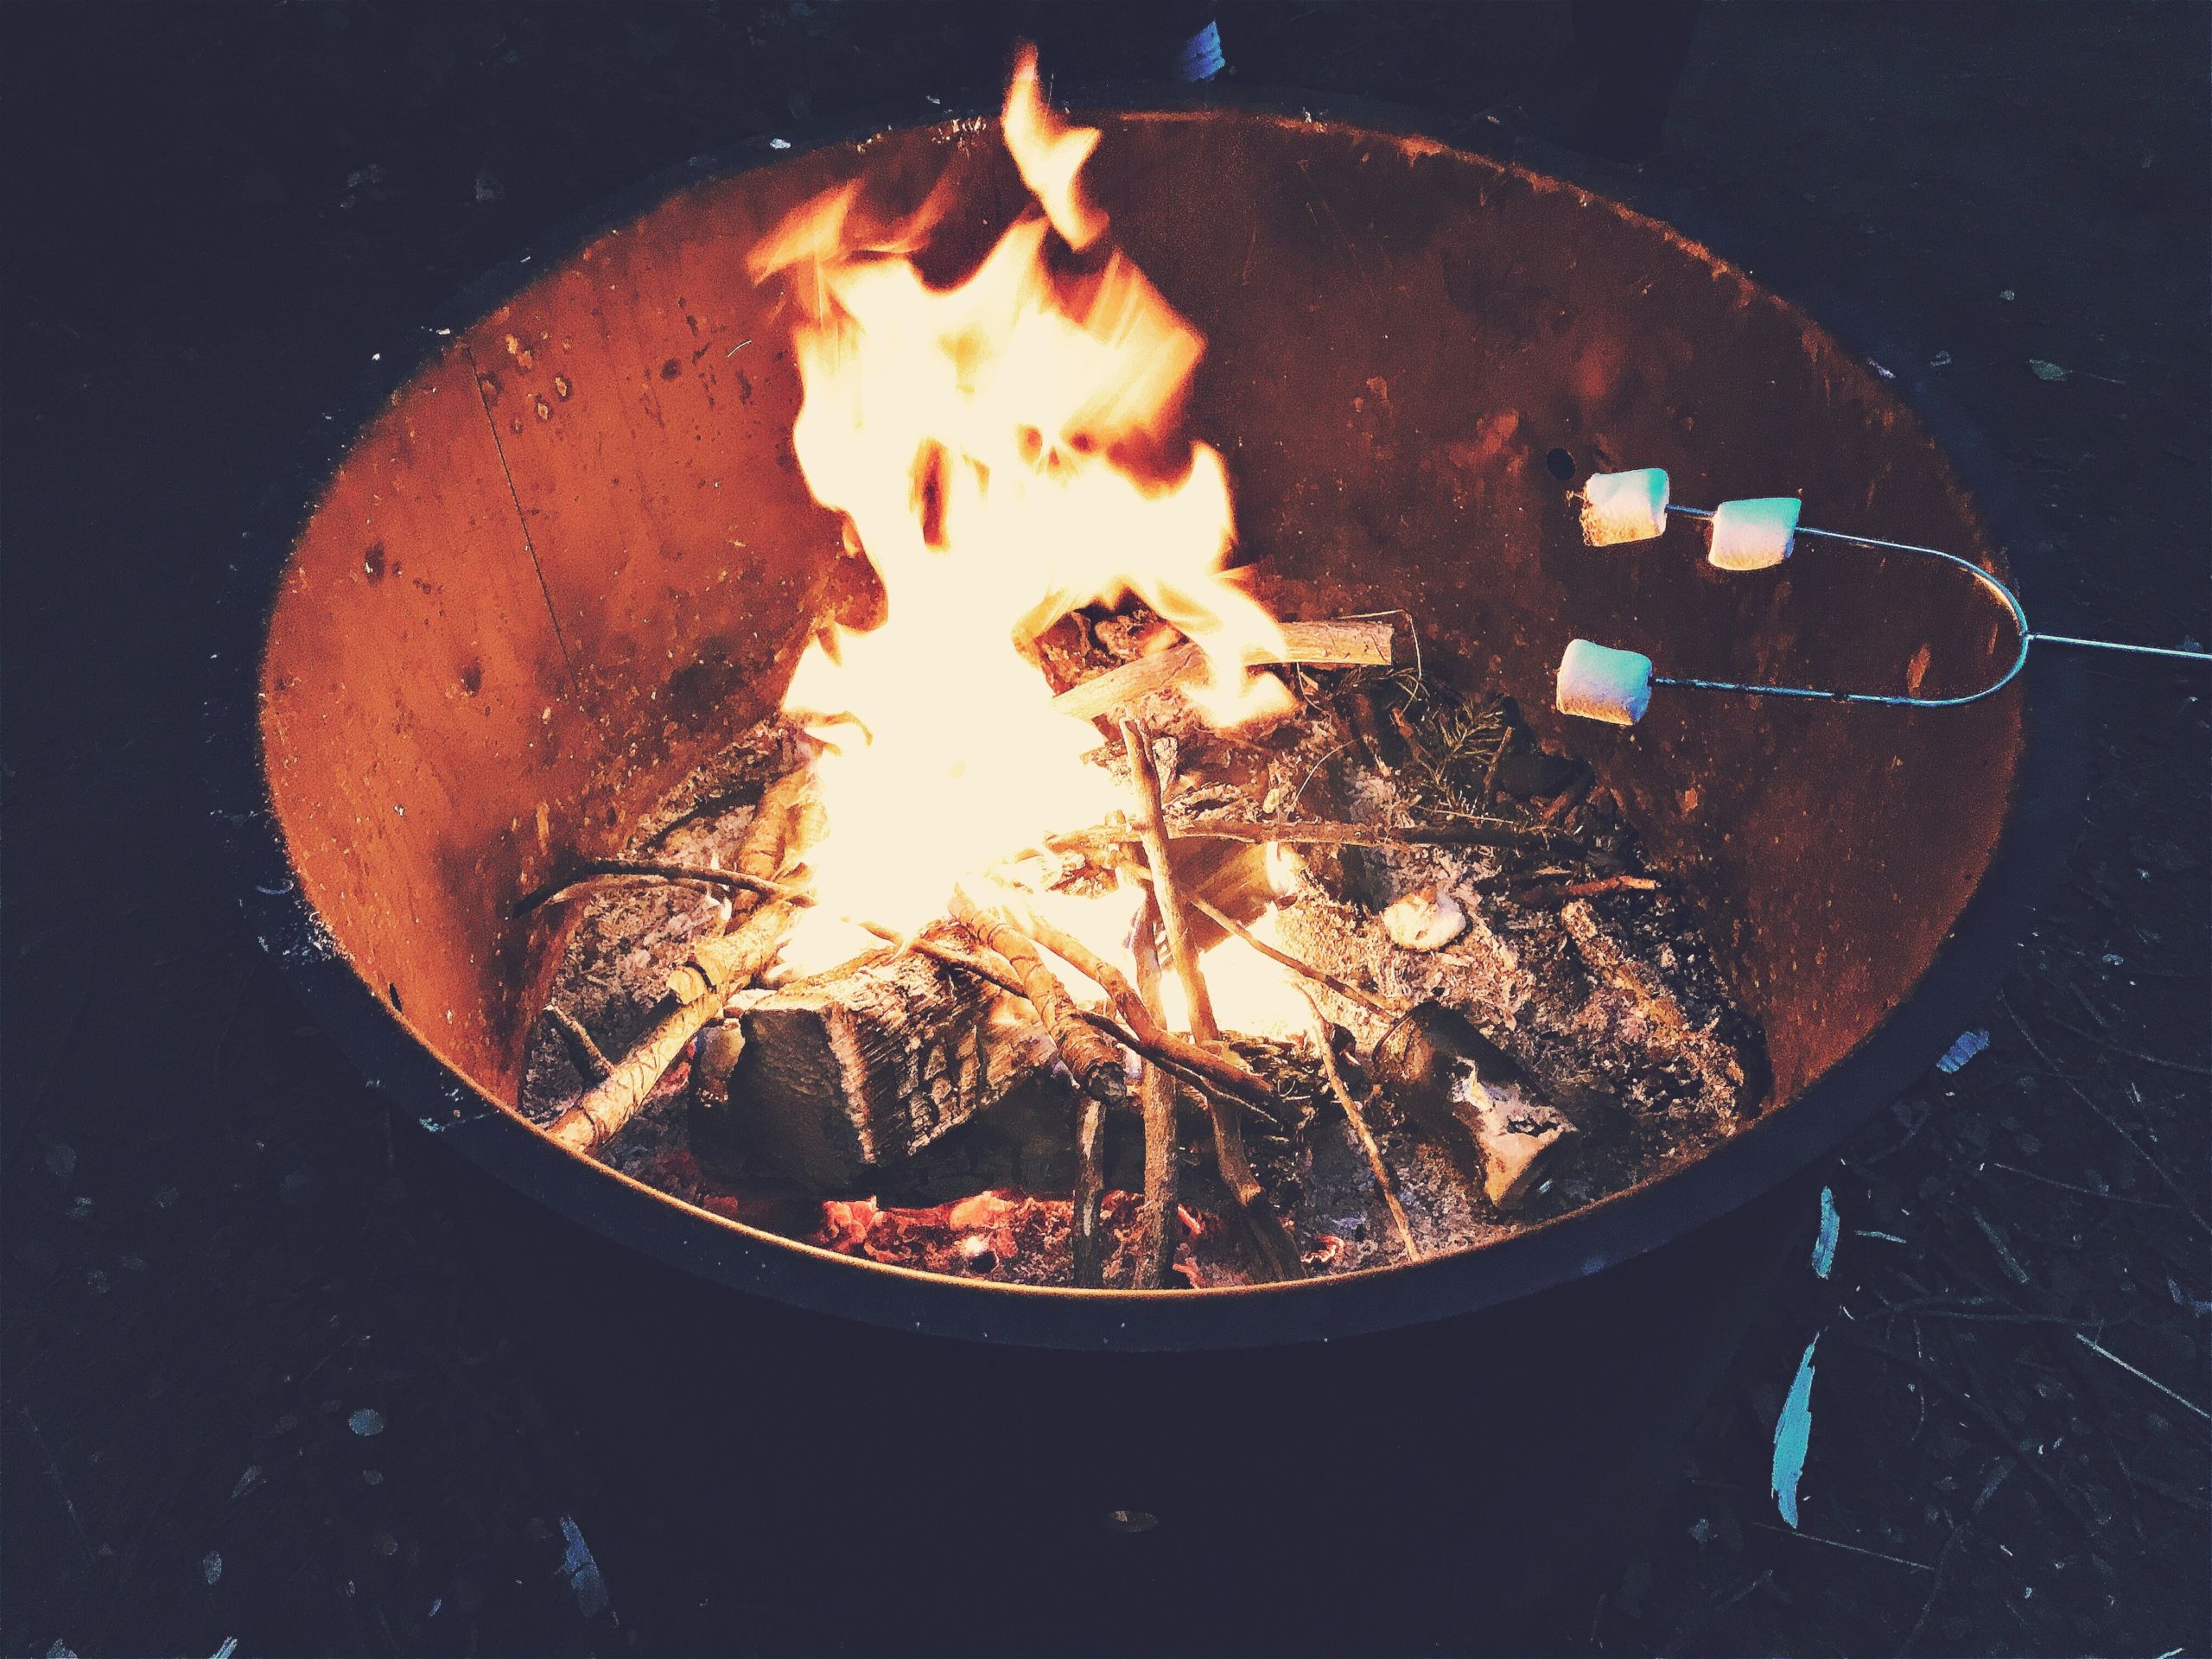 S'mores over fire pit 